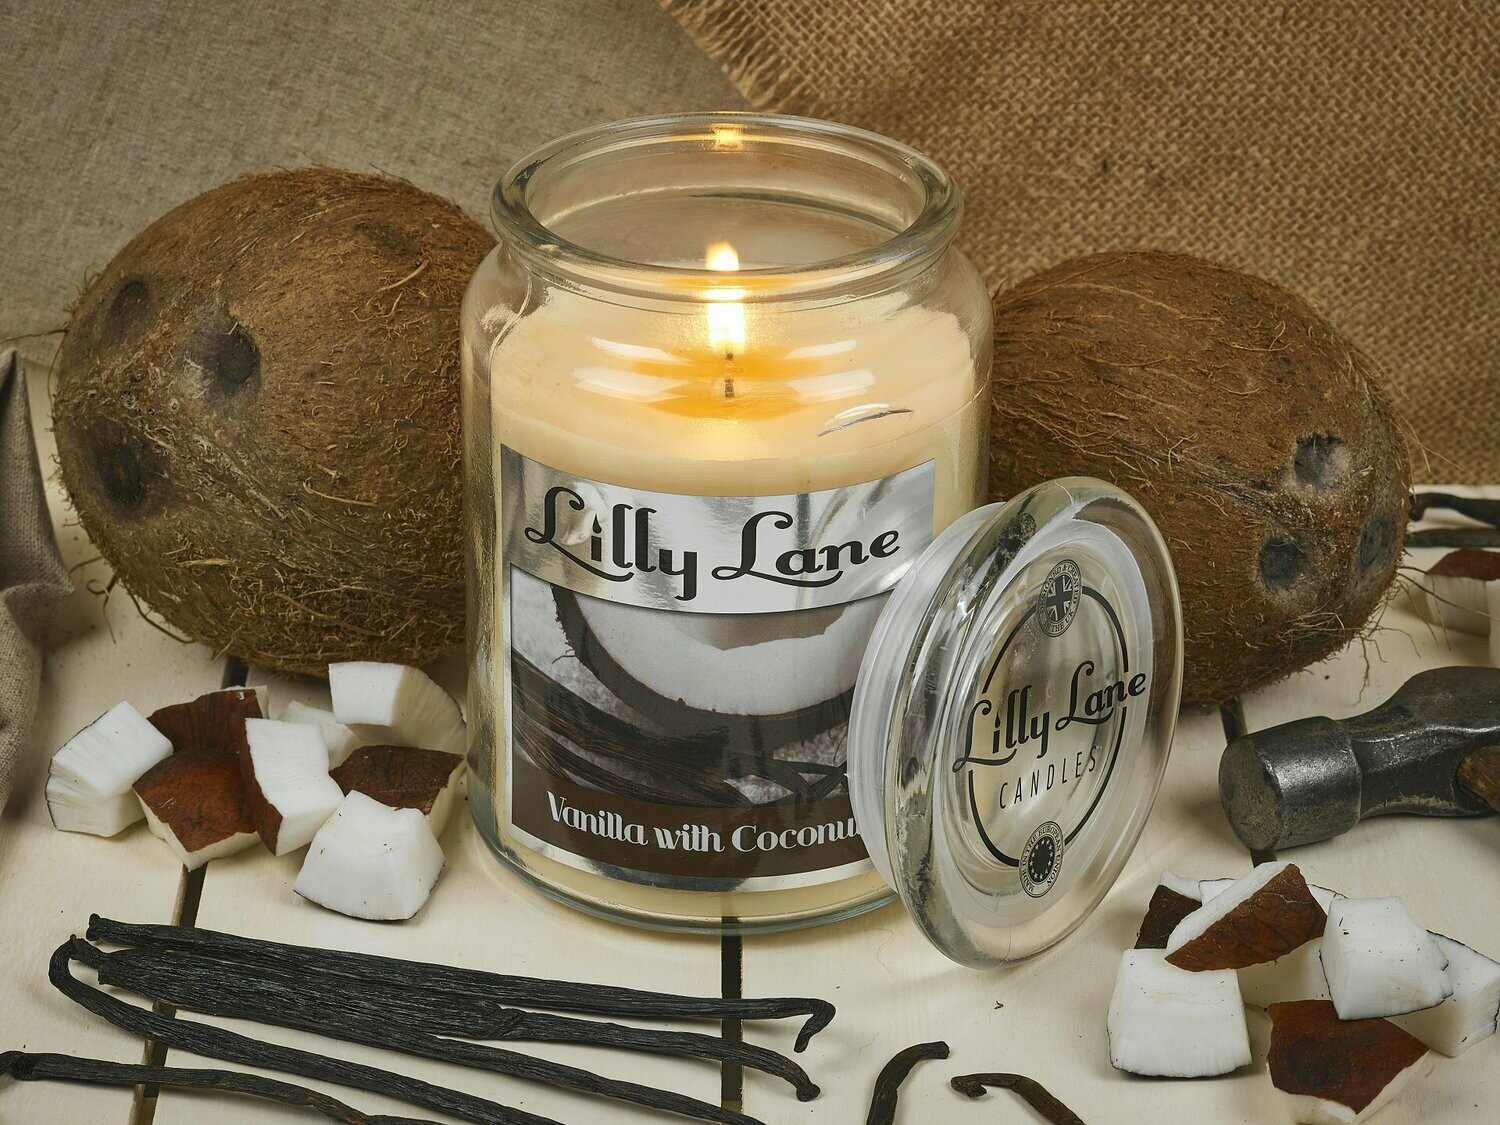 Lilly Lane Vanilla with Coconut 18oz Jar Candle